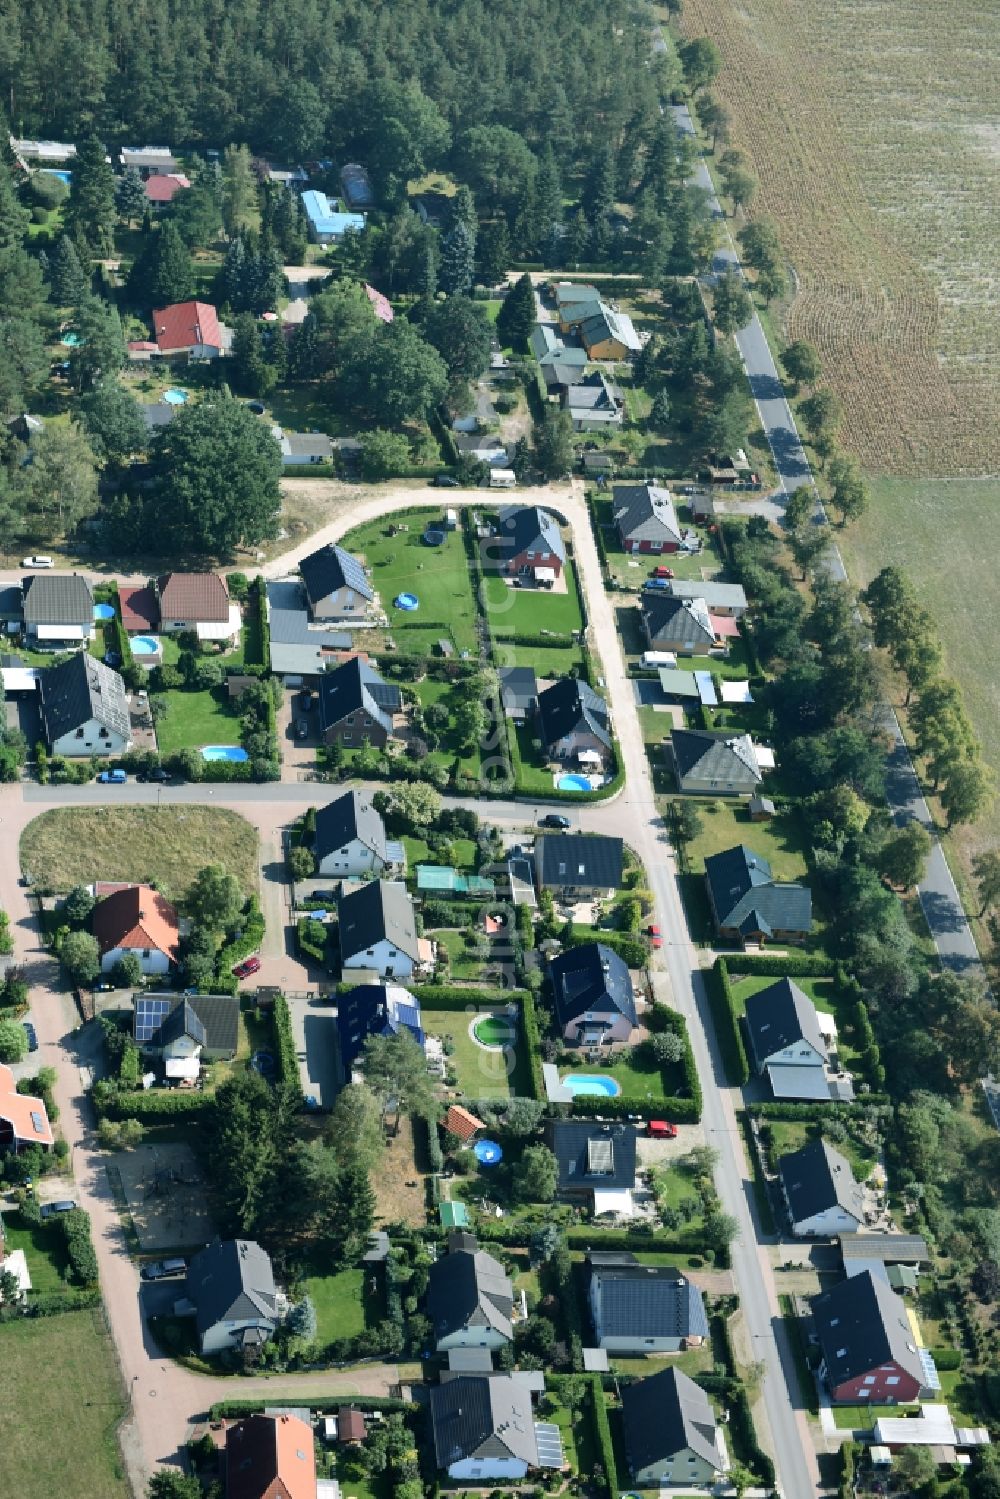 Schönwalde-Glien from above - Single-family residential area of settlement in the street am Kraemerwald in Schoenwalde-Glien in the state Brandenburg